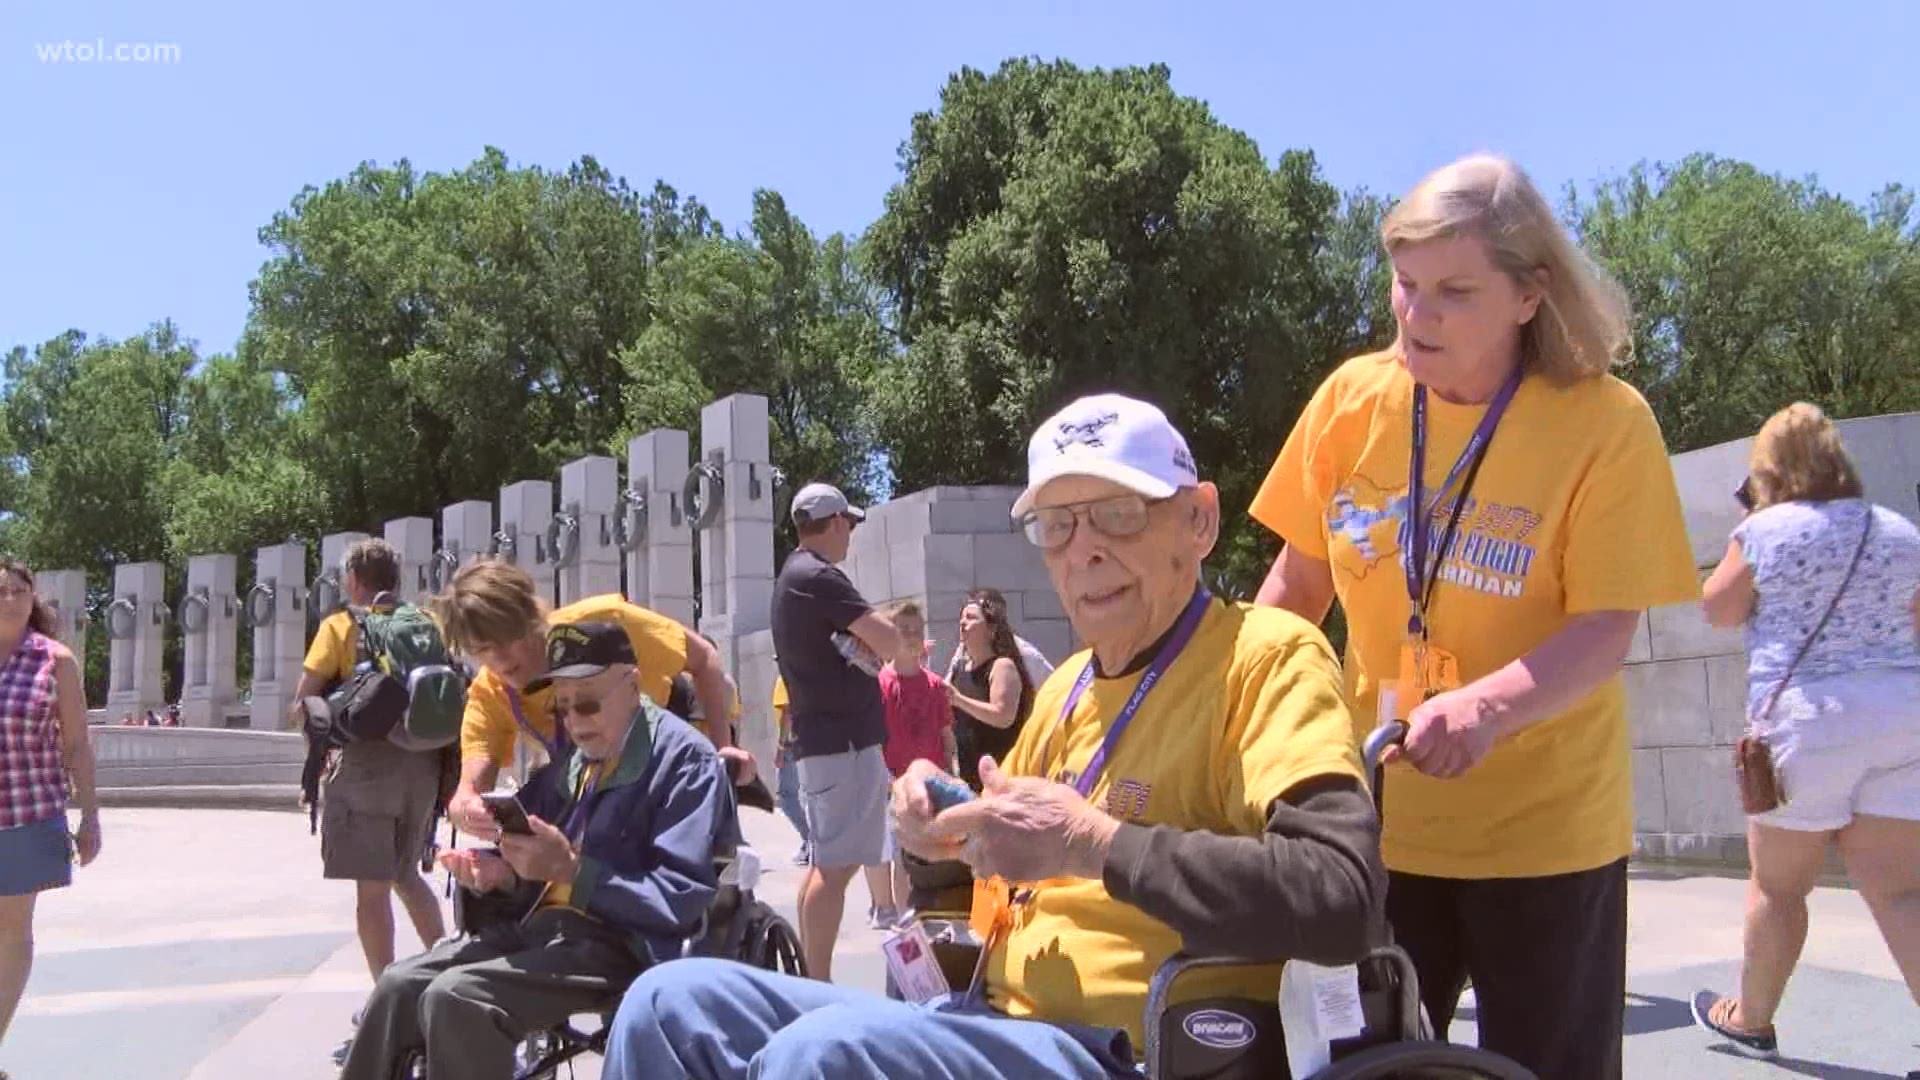 The program will resume taking veterans to Washington, D.C. to see the memorials and monuments after a year off due to COVID-19